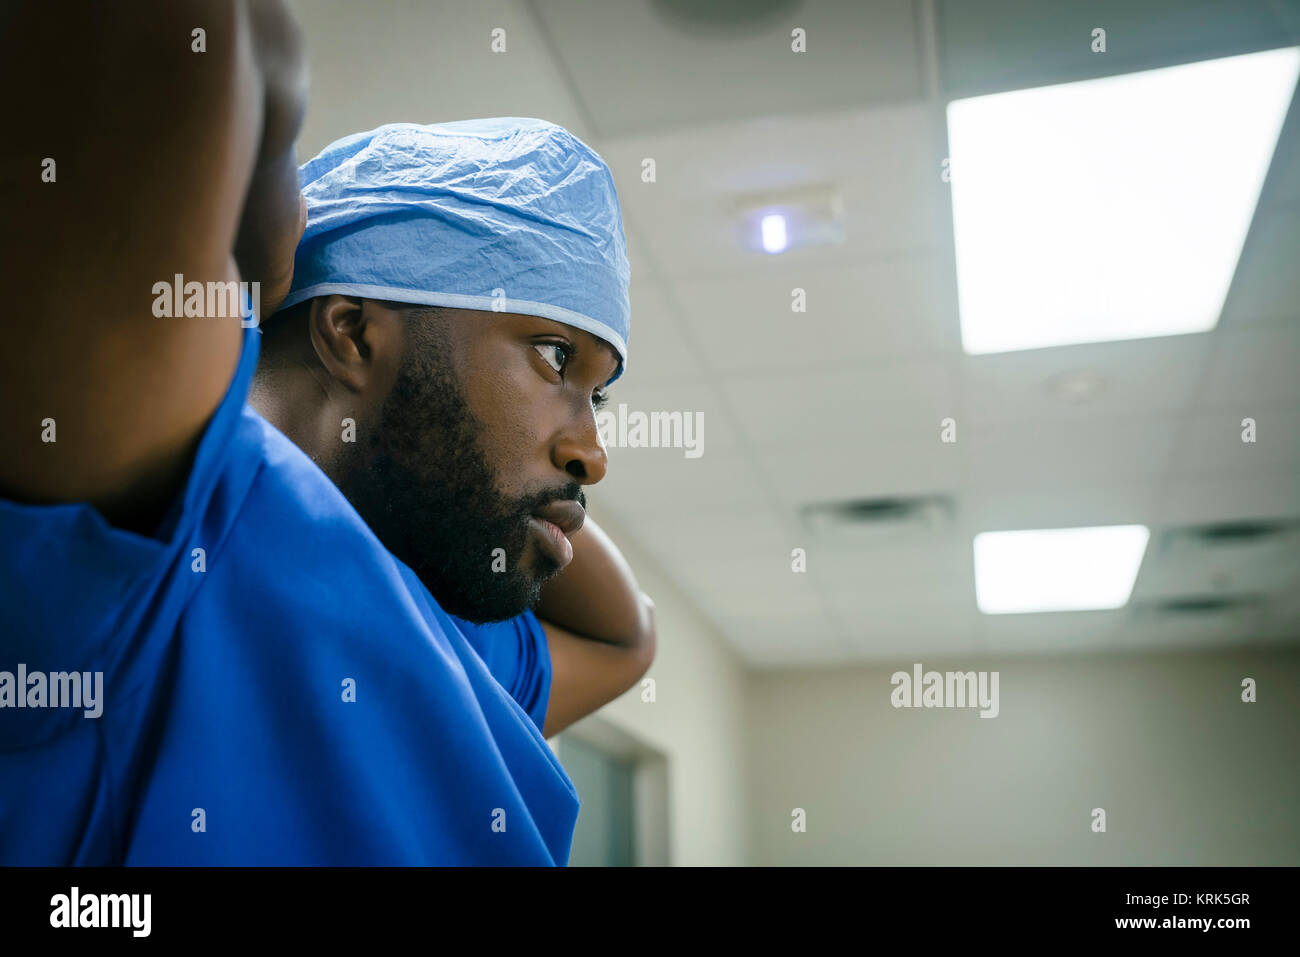 Black doctor wearing surgical cap Stock Photo